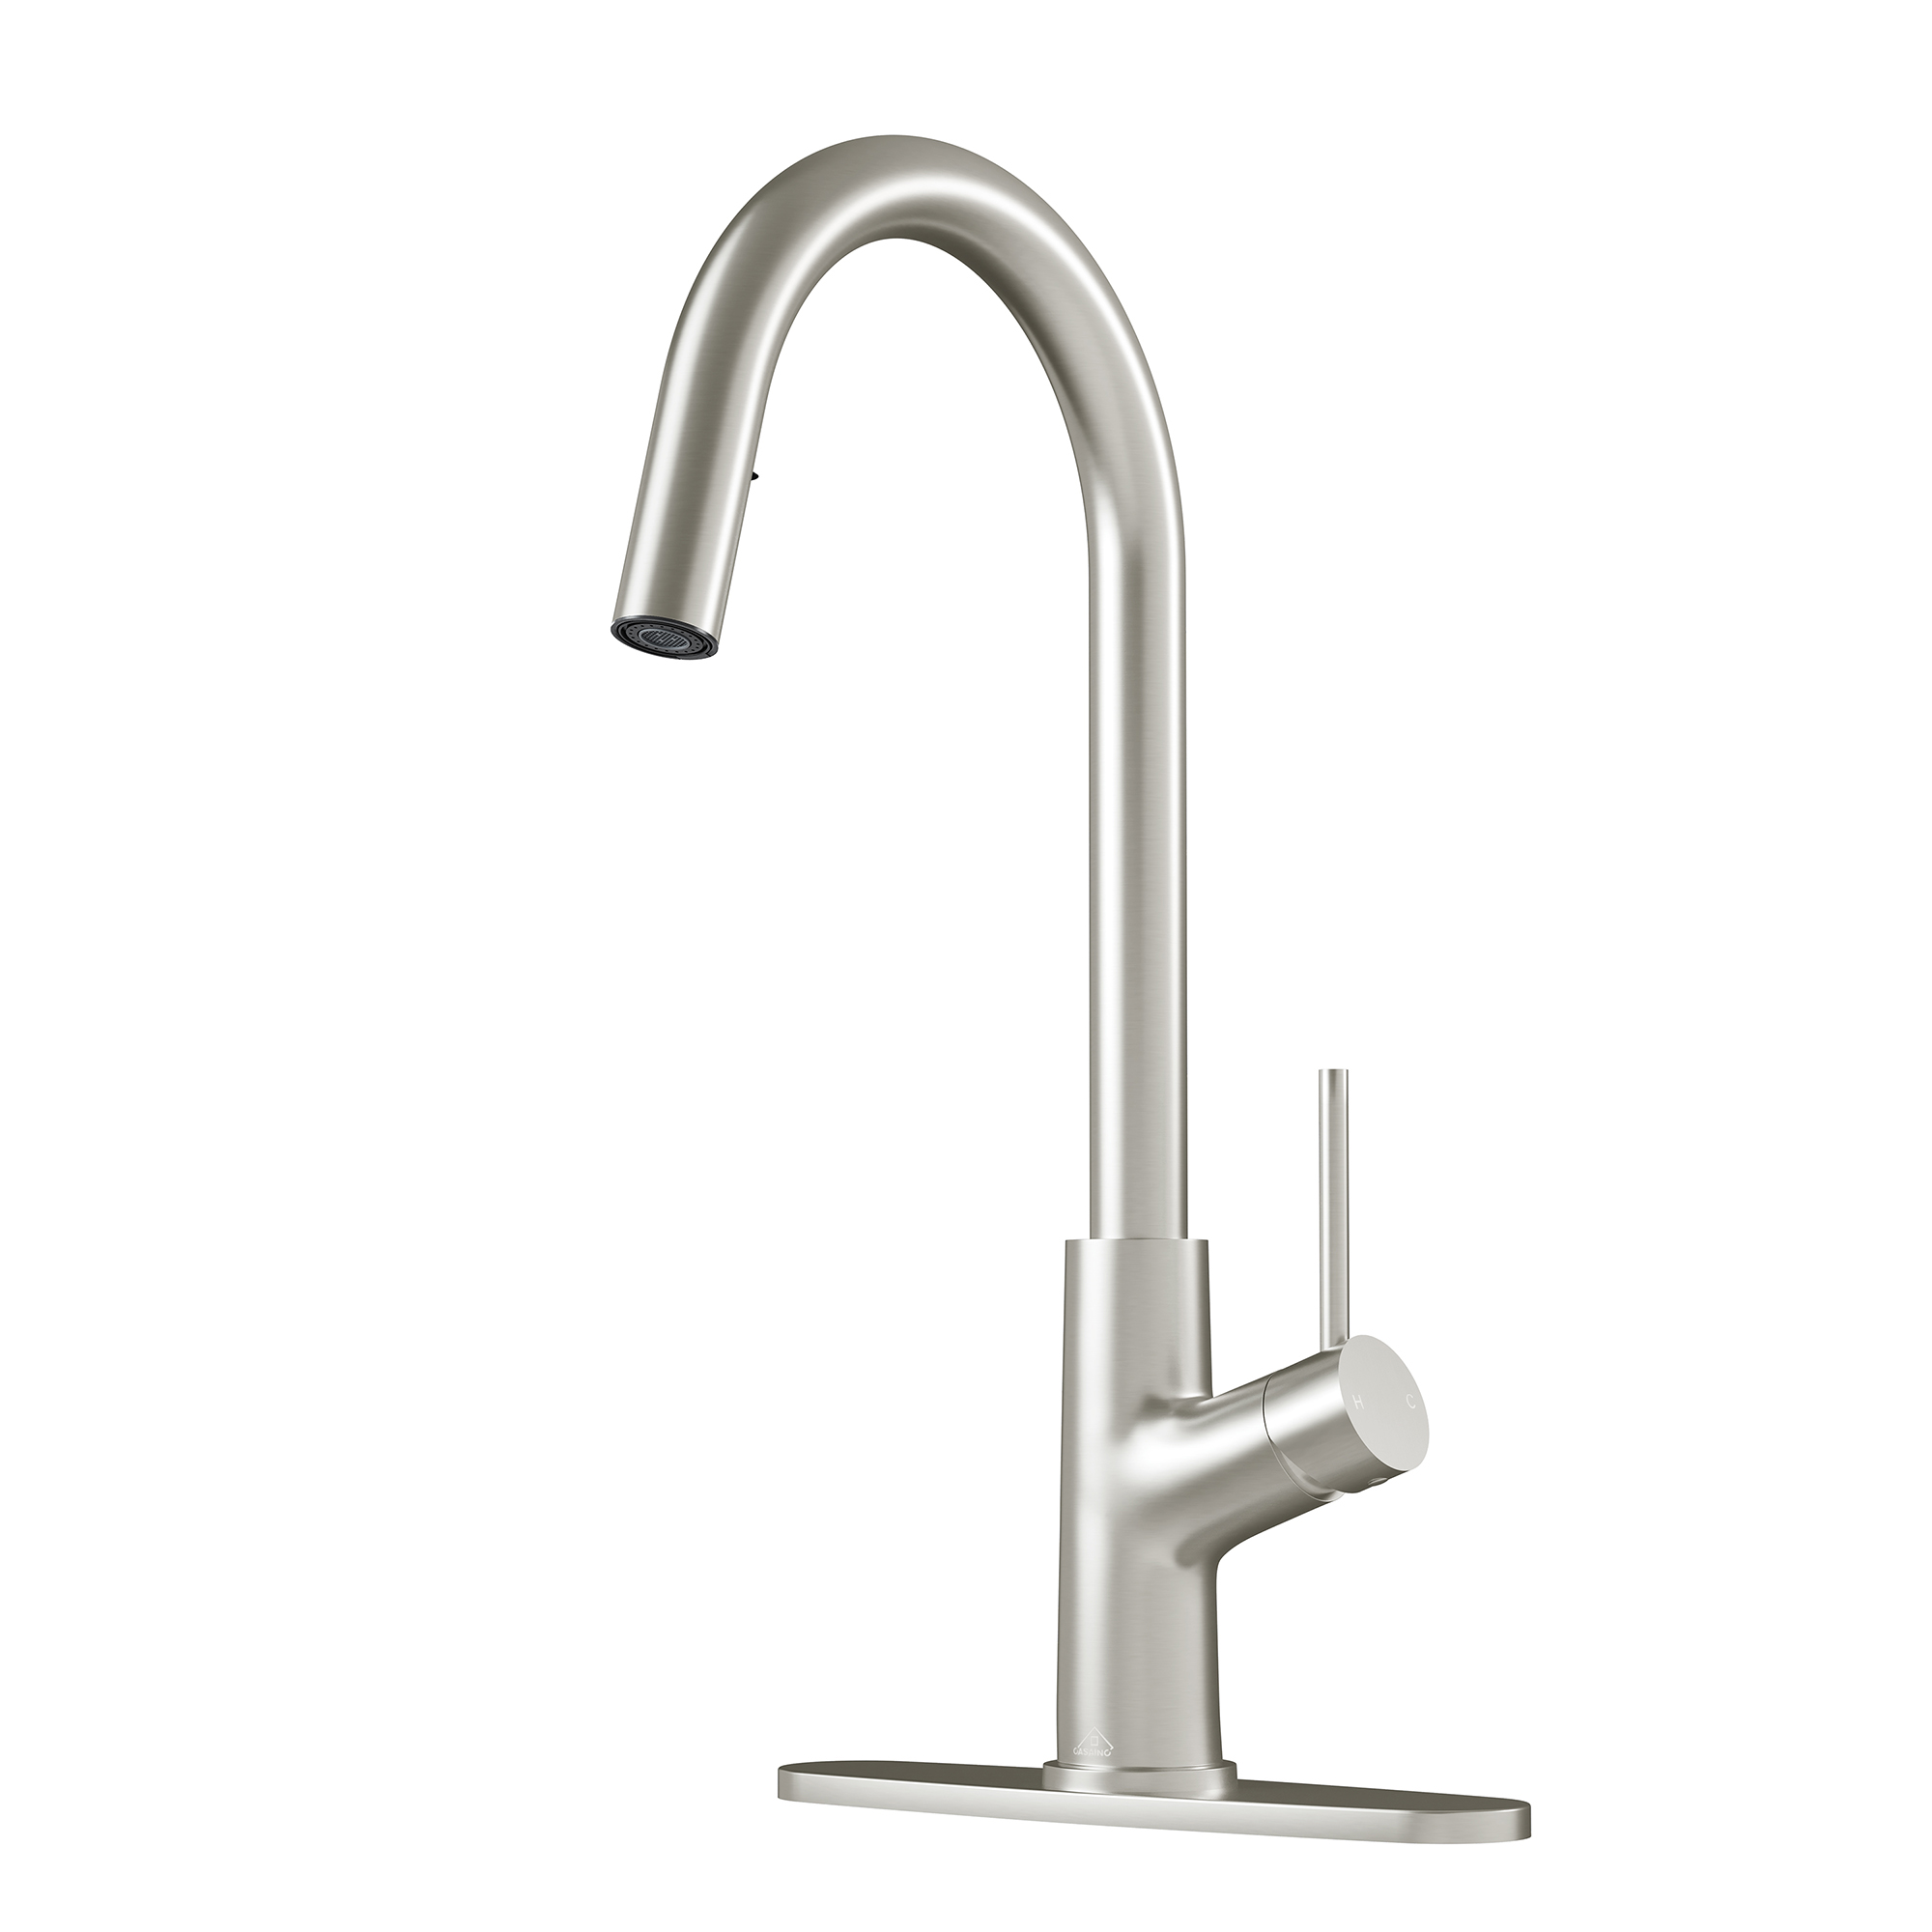 CASAINC Single-Handle Kitchen Faucet with  Pull-Down Sprayer